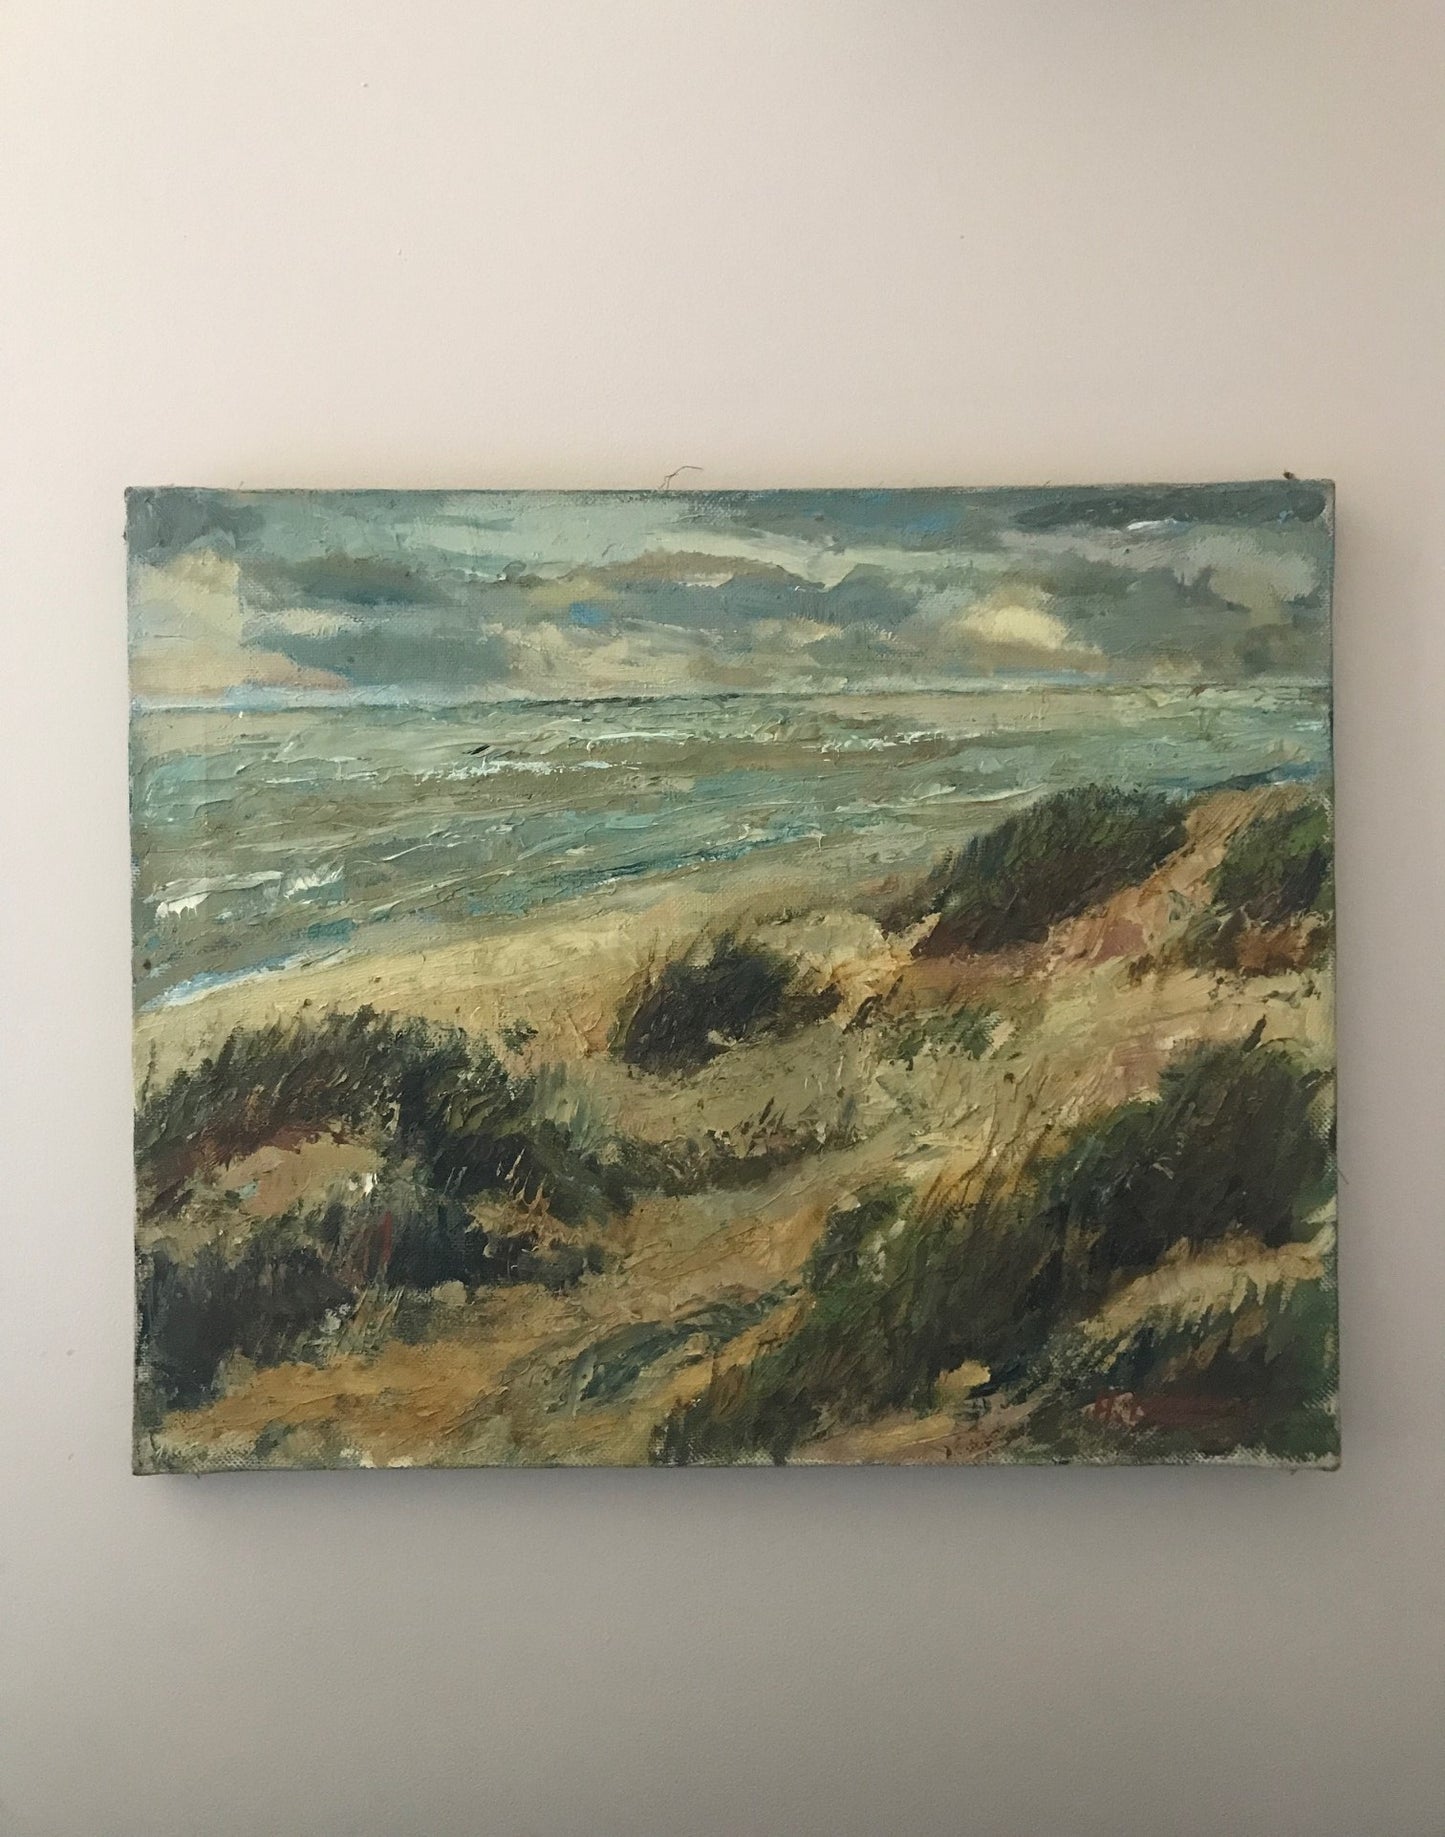 A Sea View Painting - Oil on Canvas